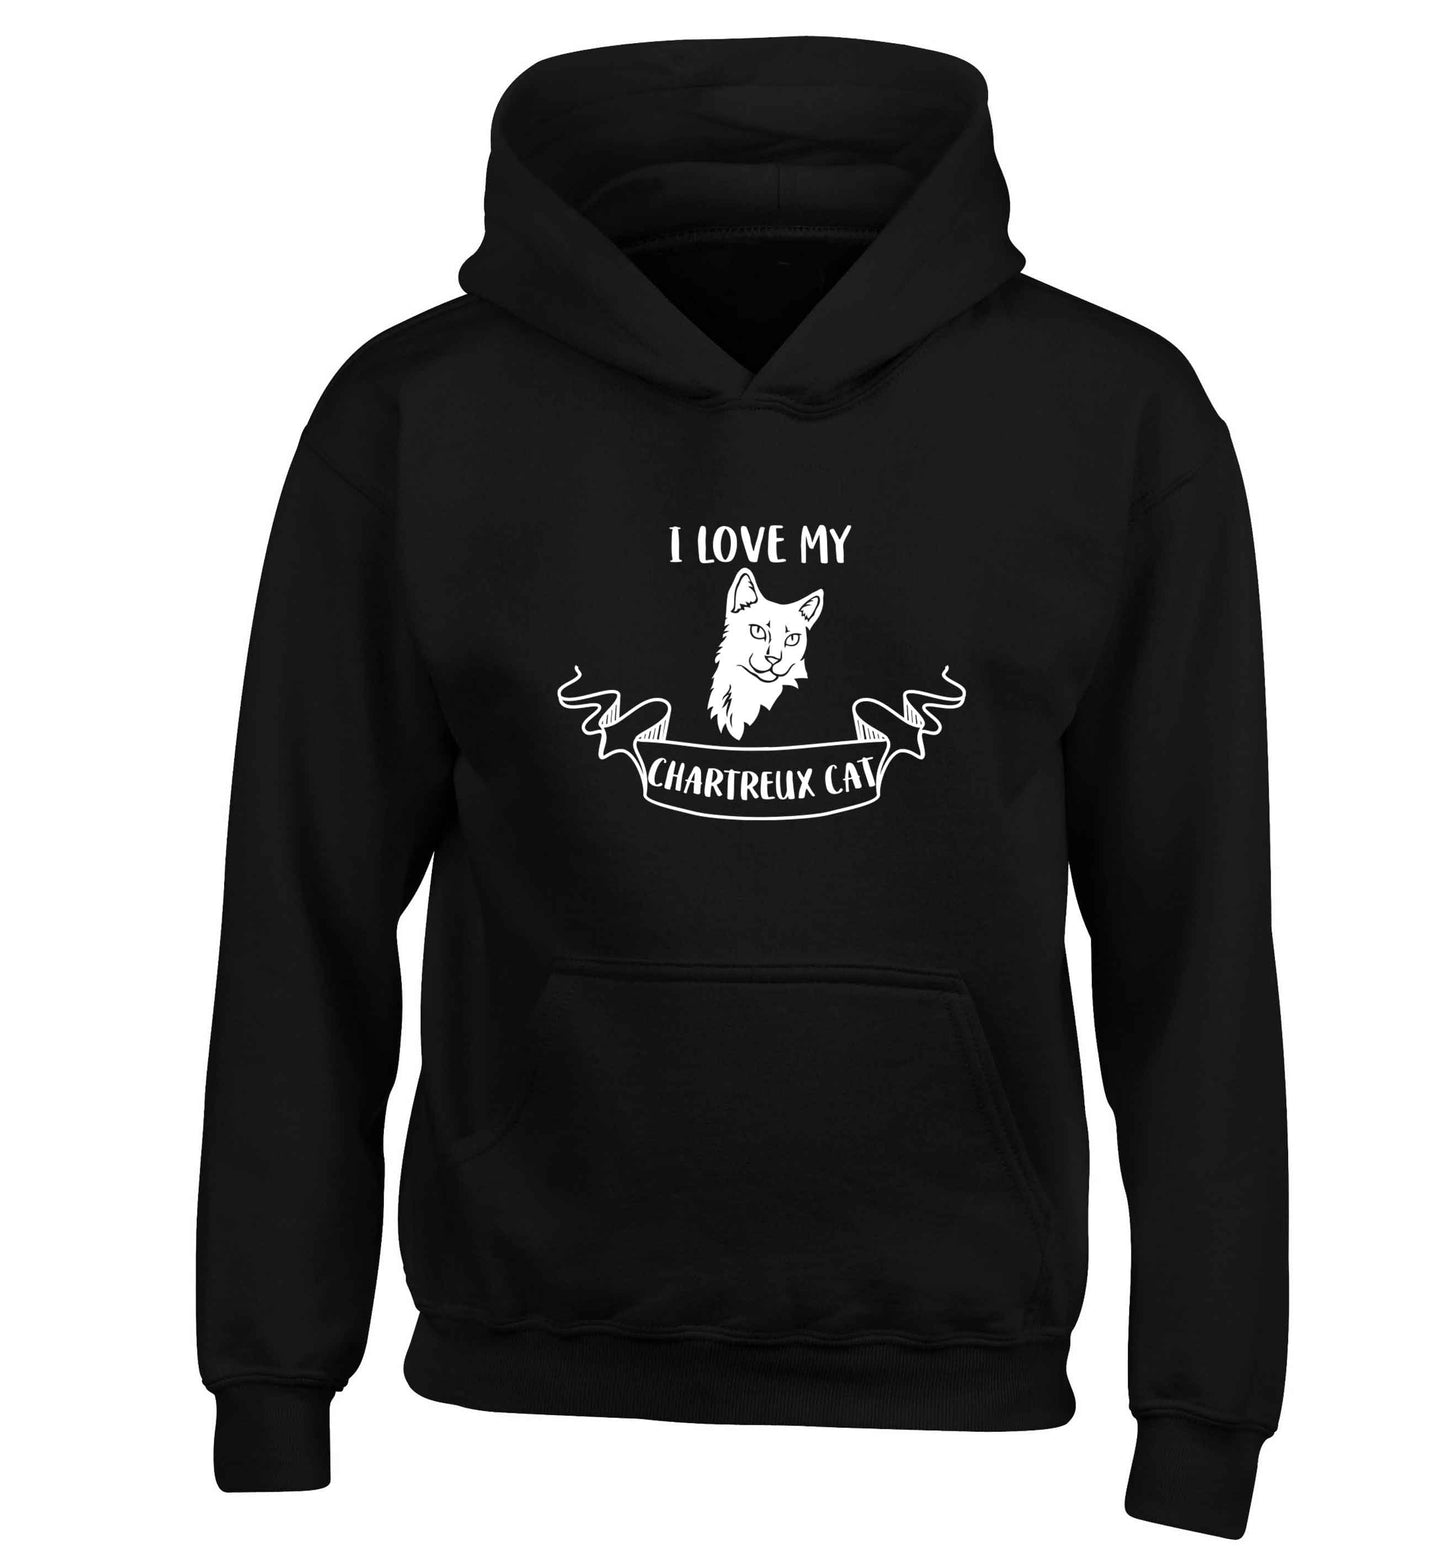 I love my chartreux cat children's black hoodie 12-13 Years